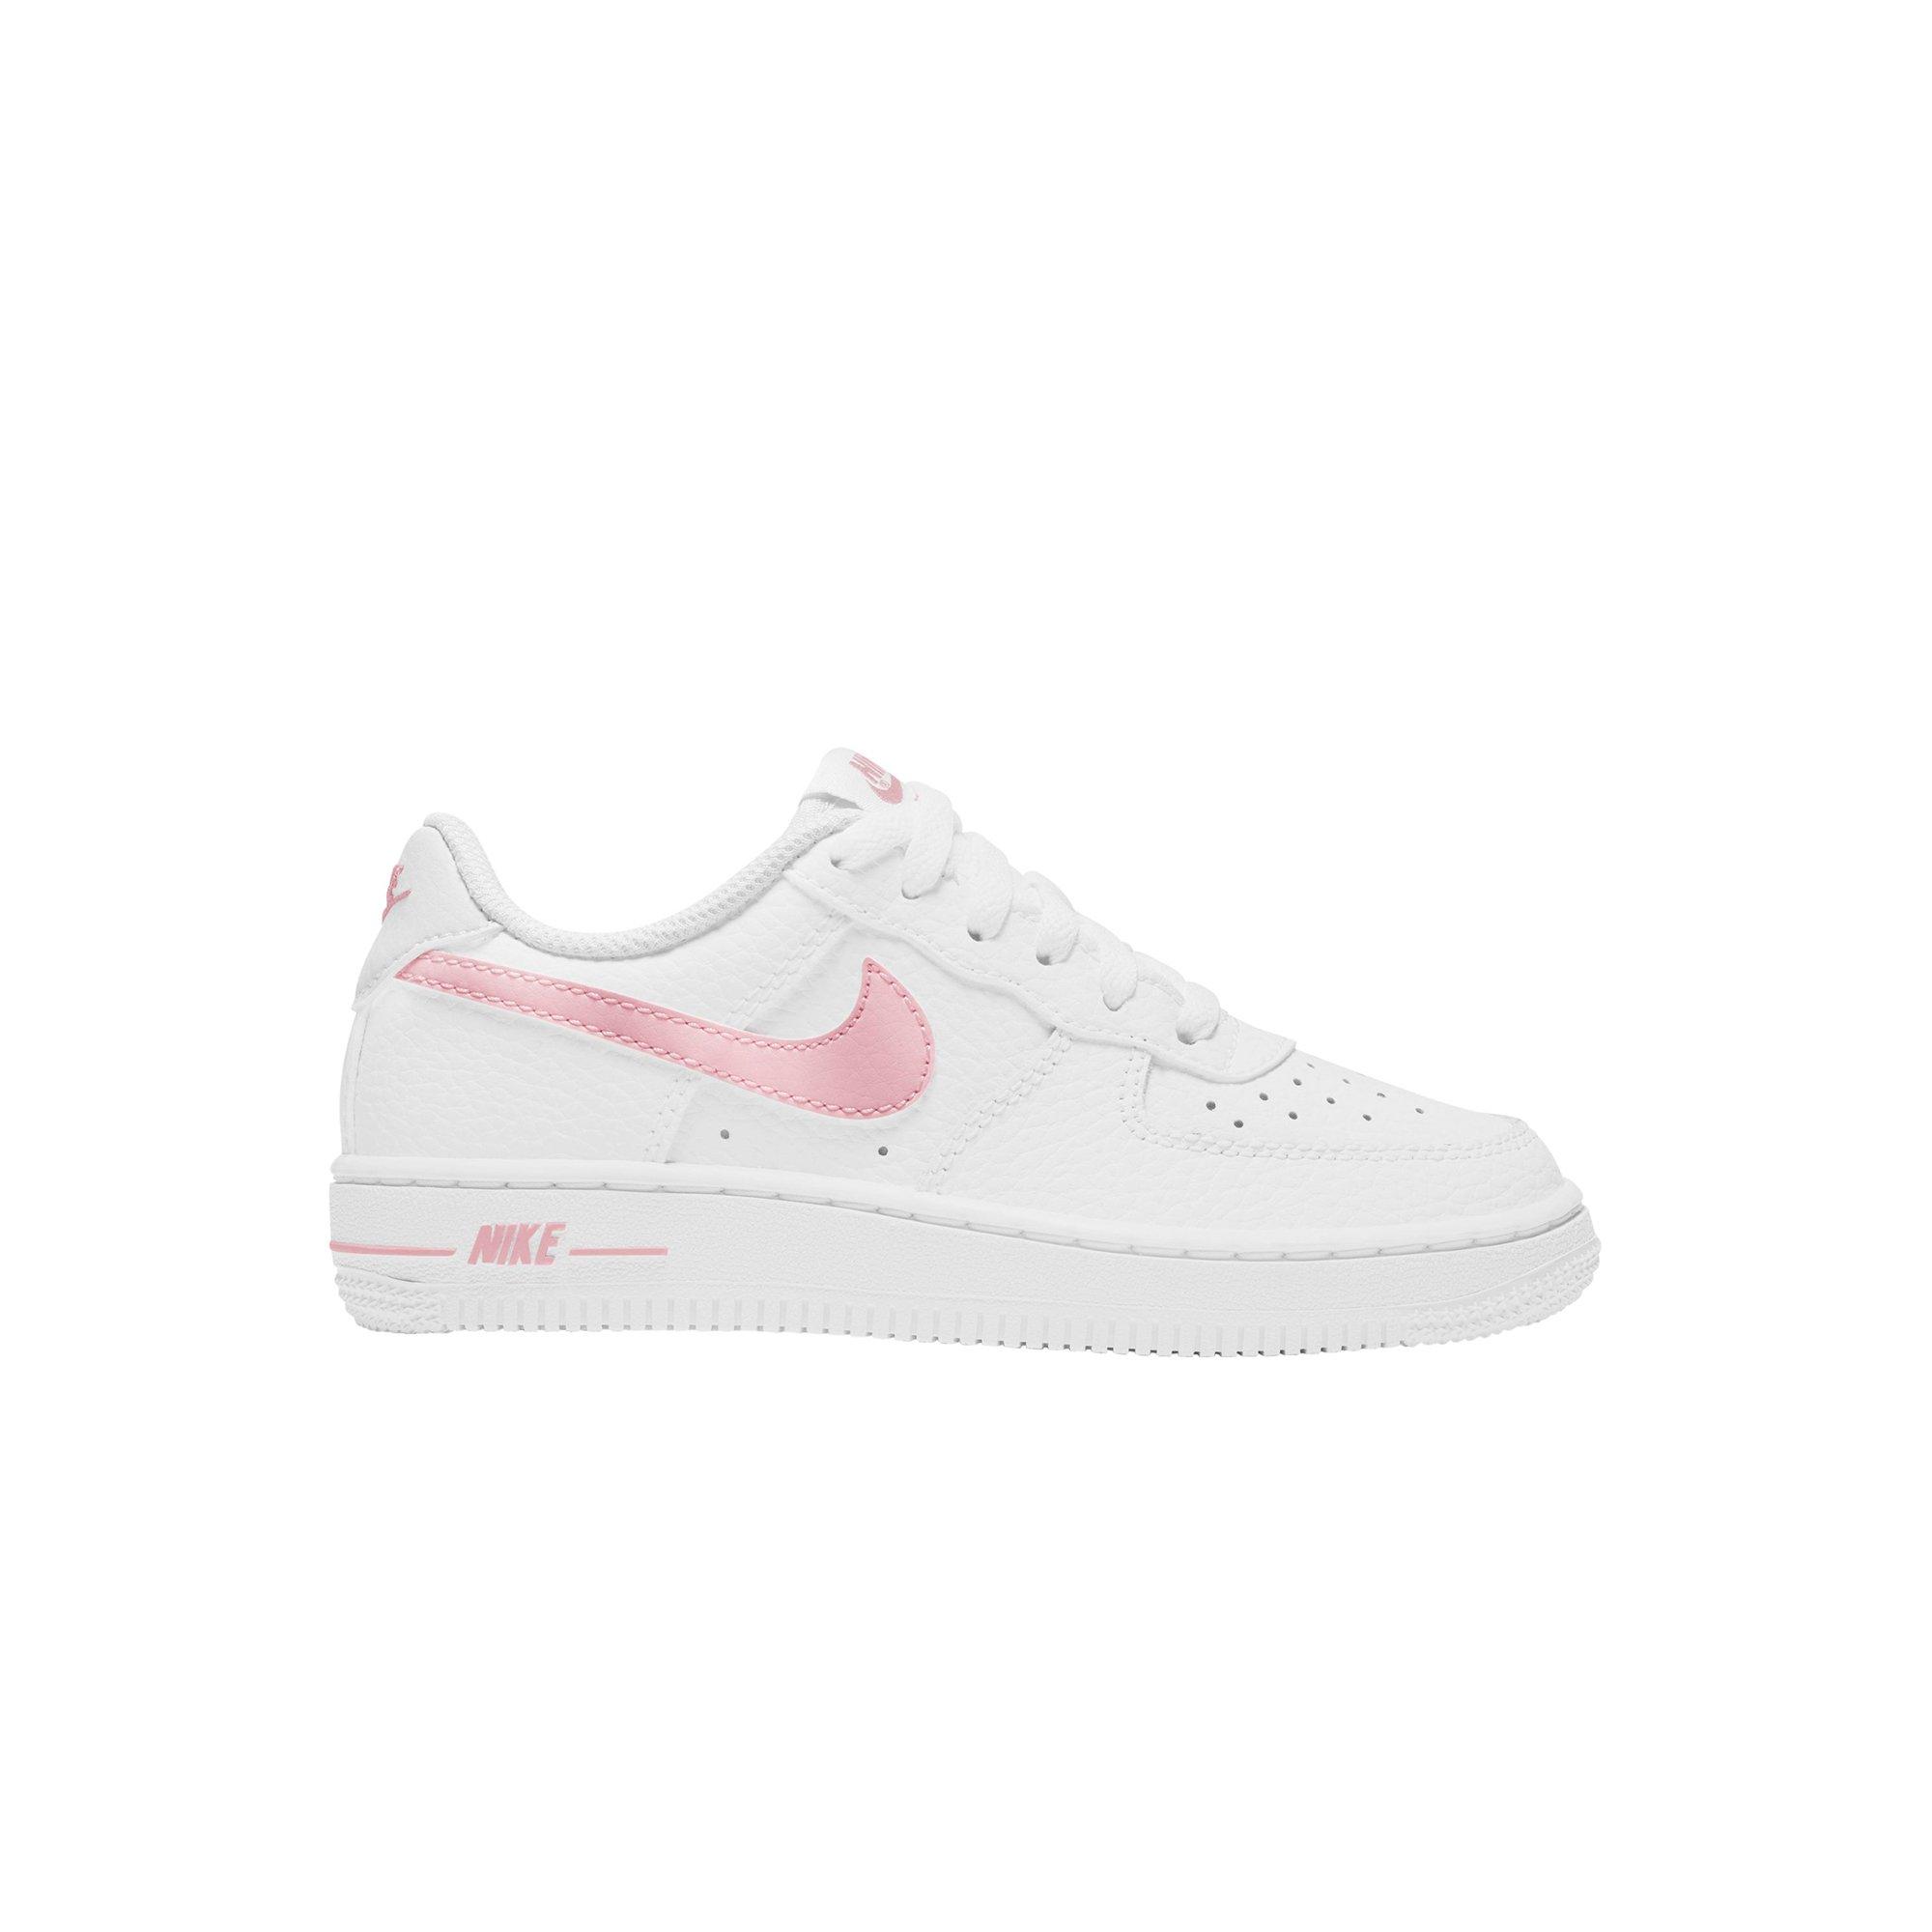 Nike Air Force One Orange Hombre Réplica AAA - Stand Shop